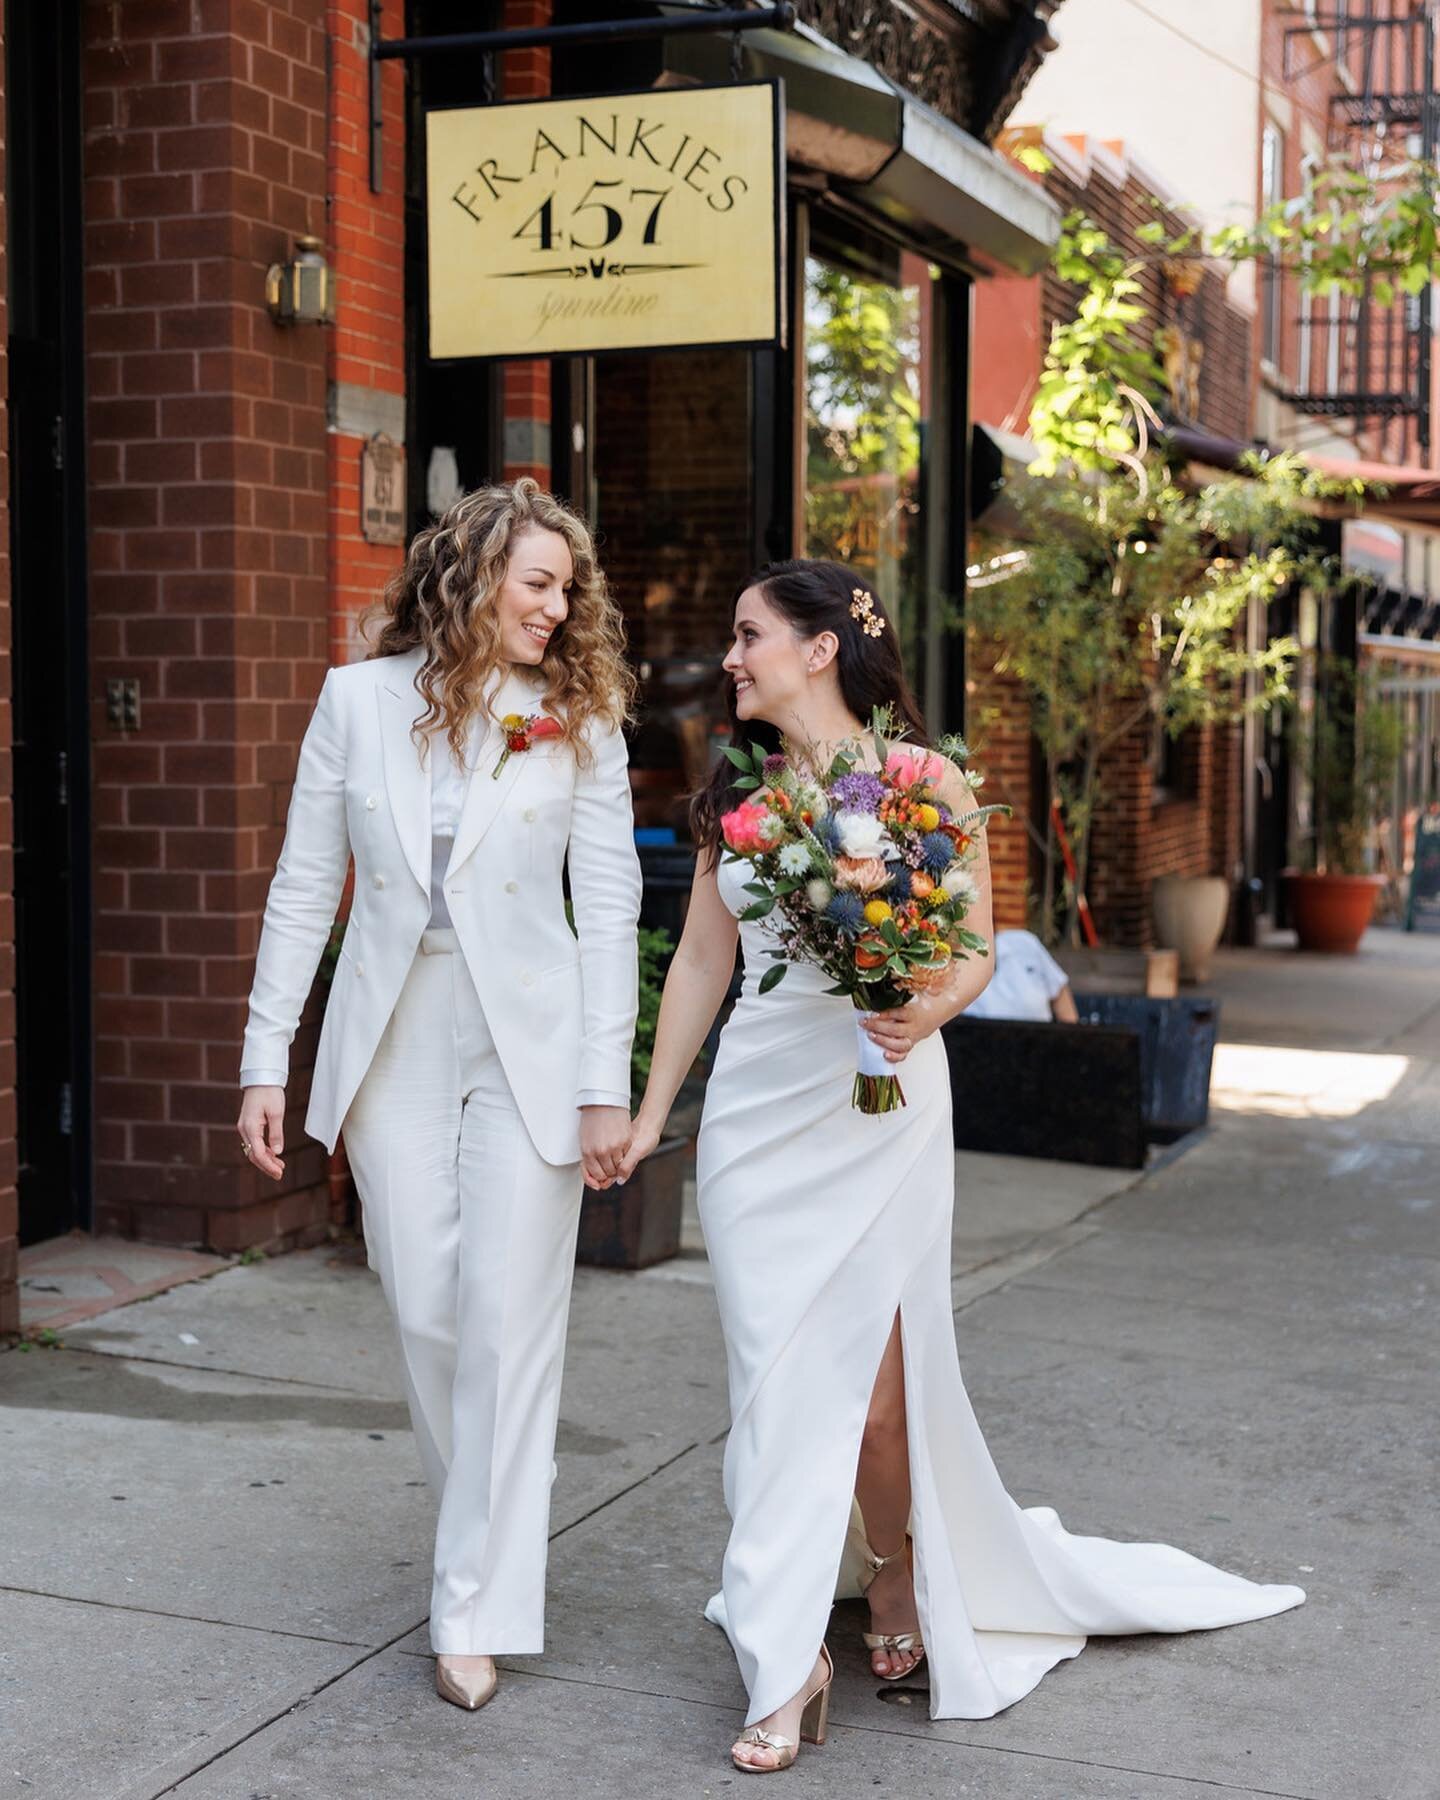 we're coming up on Lauren &amp; Rachel's 1-year anniversary and we'll take any excuse to share more photos from this loved-up brunch wedding!
.
.
.
📍 @frankiessputino @brooklynsocialbar
📸 @sarahbodeclark
👰🏻&zwj;♀️ @bespokebeautybridal
💐 @nectara